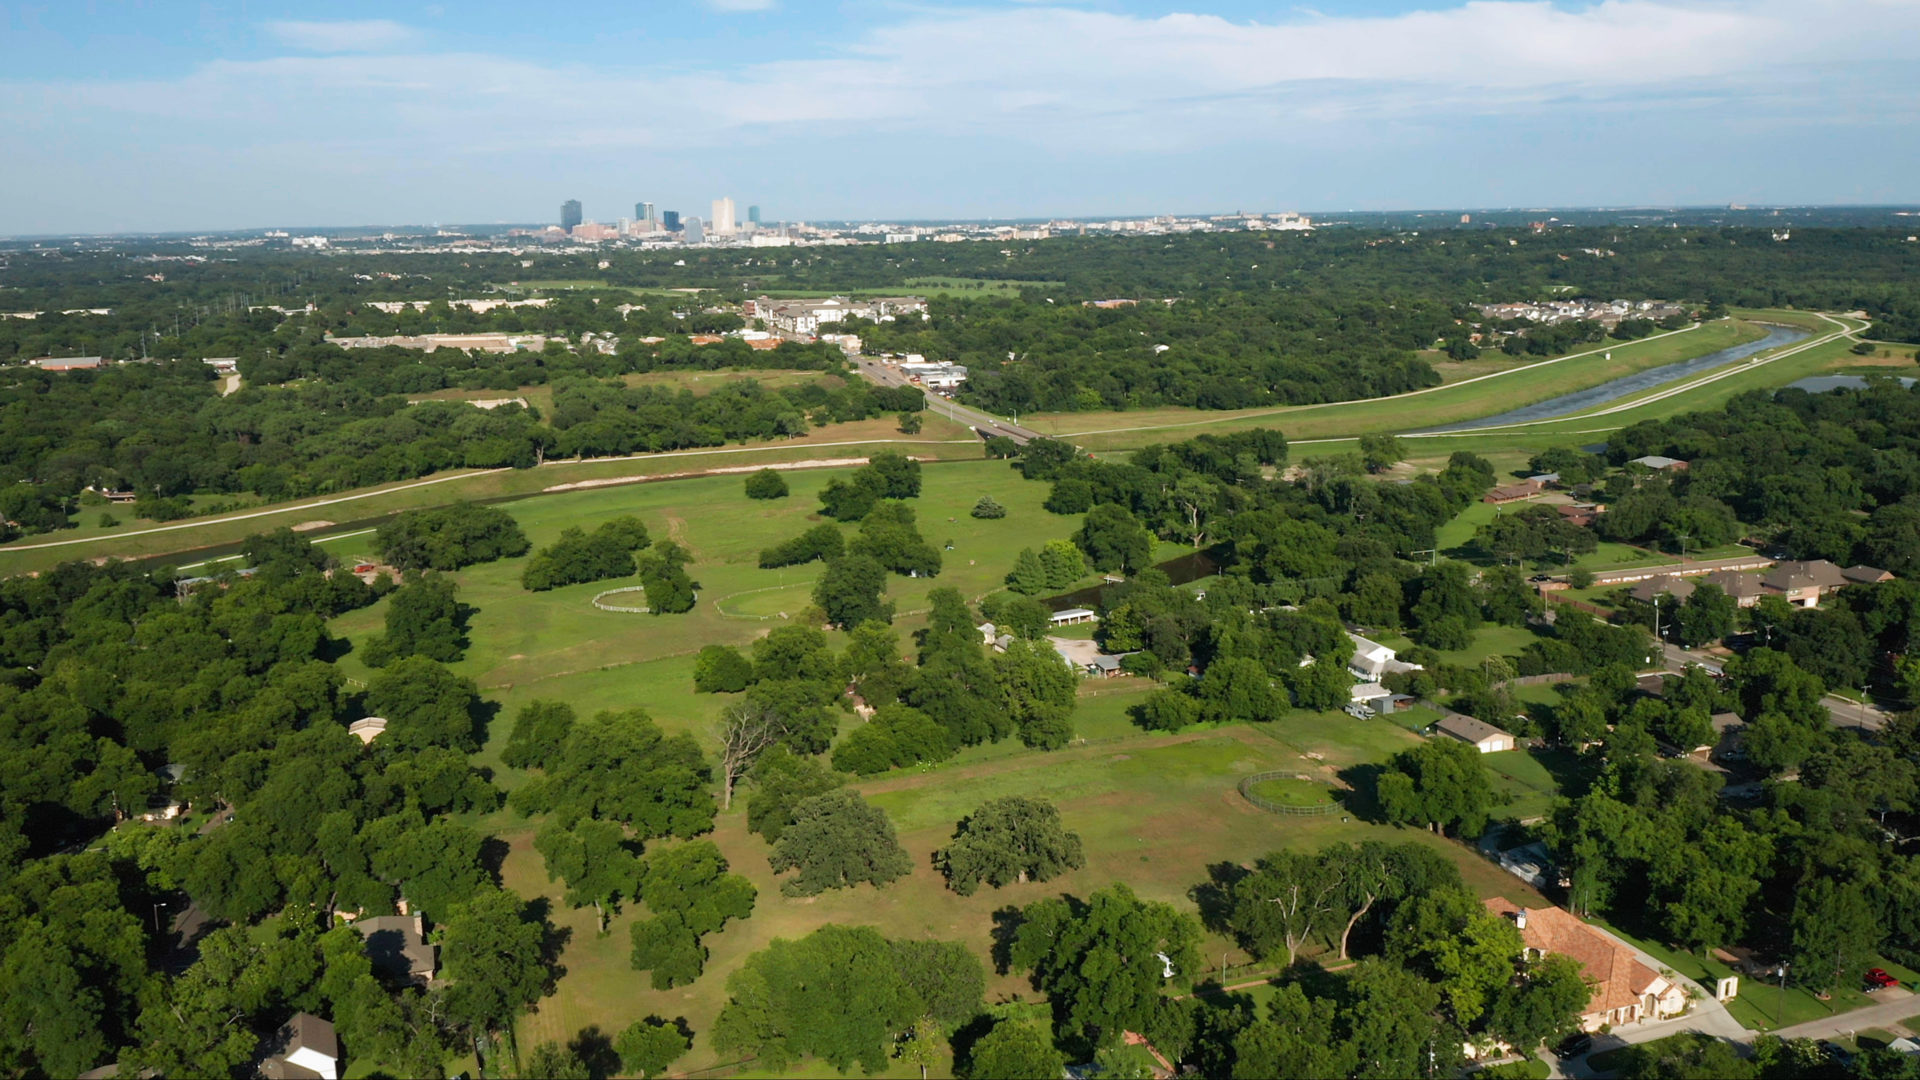 Zoomed out aerial view of a large farm with numerous trees and a view of the Trinity River and downtown Fort Worth